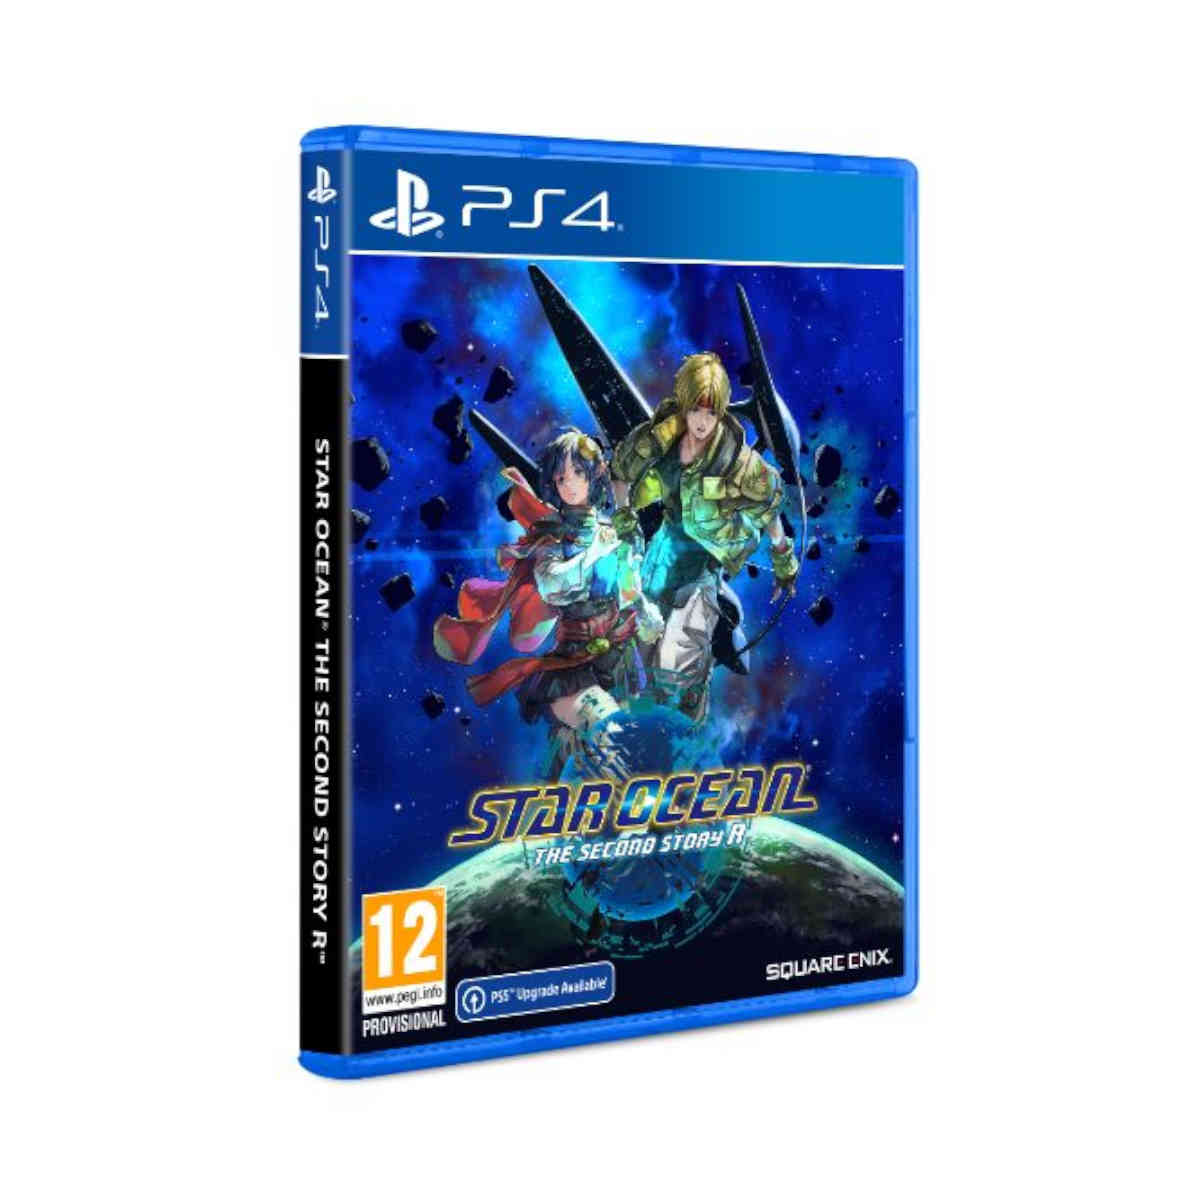 SALE: £22.85 Star Ocean: The Second Story R #PS4 #SQUAREENIX #StarOceanTheSecondStoryR #PlayStationPlus #PlayStationStore #PlayStation #PSPlusPremium #PSPlus #VideoGames: Star Ocean: The Second Story  -The highly acclaimed second instalment in the STAR… dlvr.it/T7XC5v